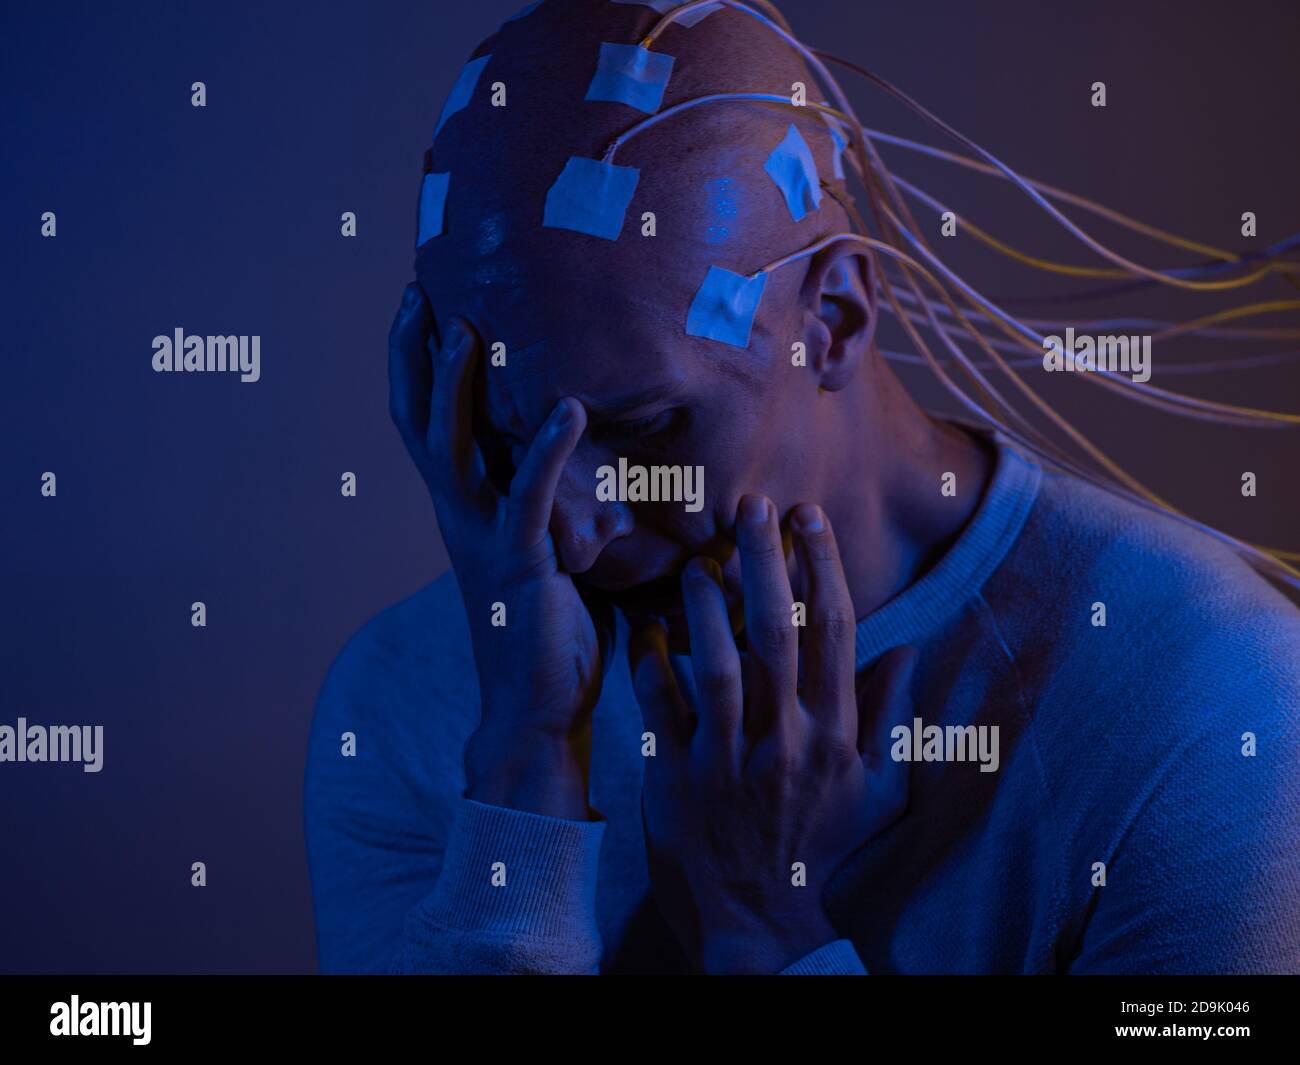 Man with a bald head with wires connected. Fear and anxiety. Examination of the brain, mind control. Stock Photo